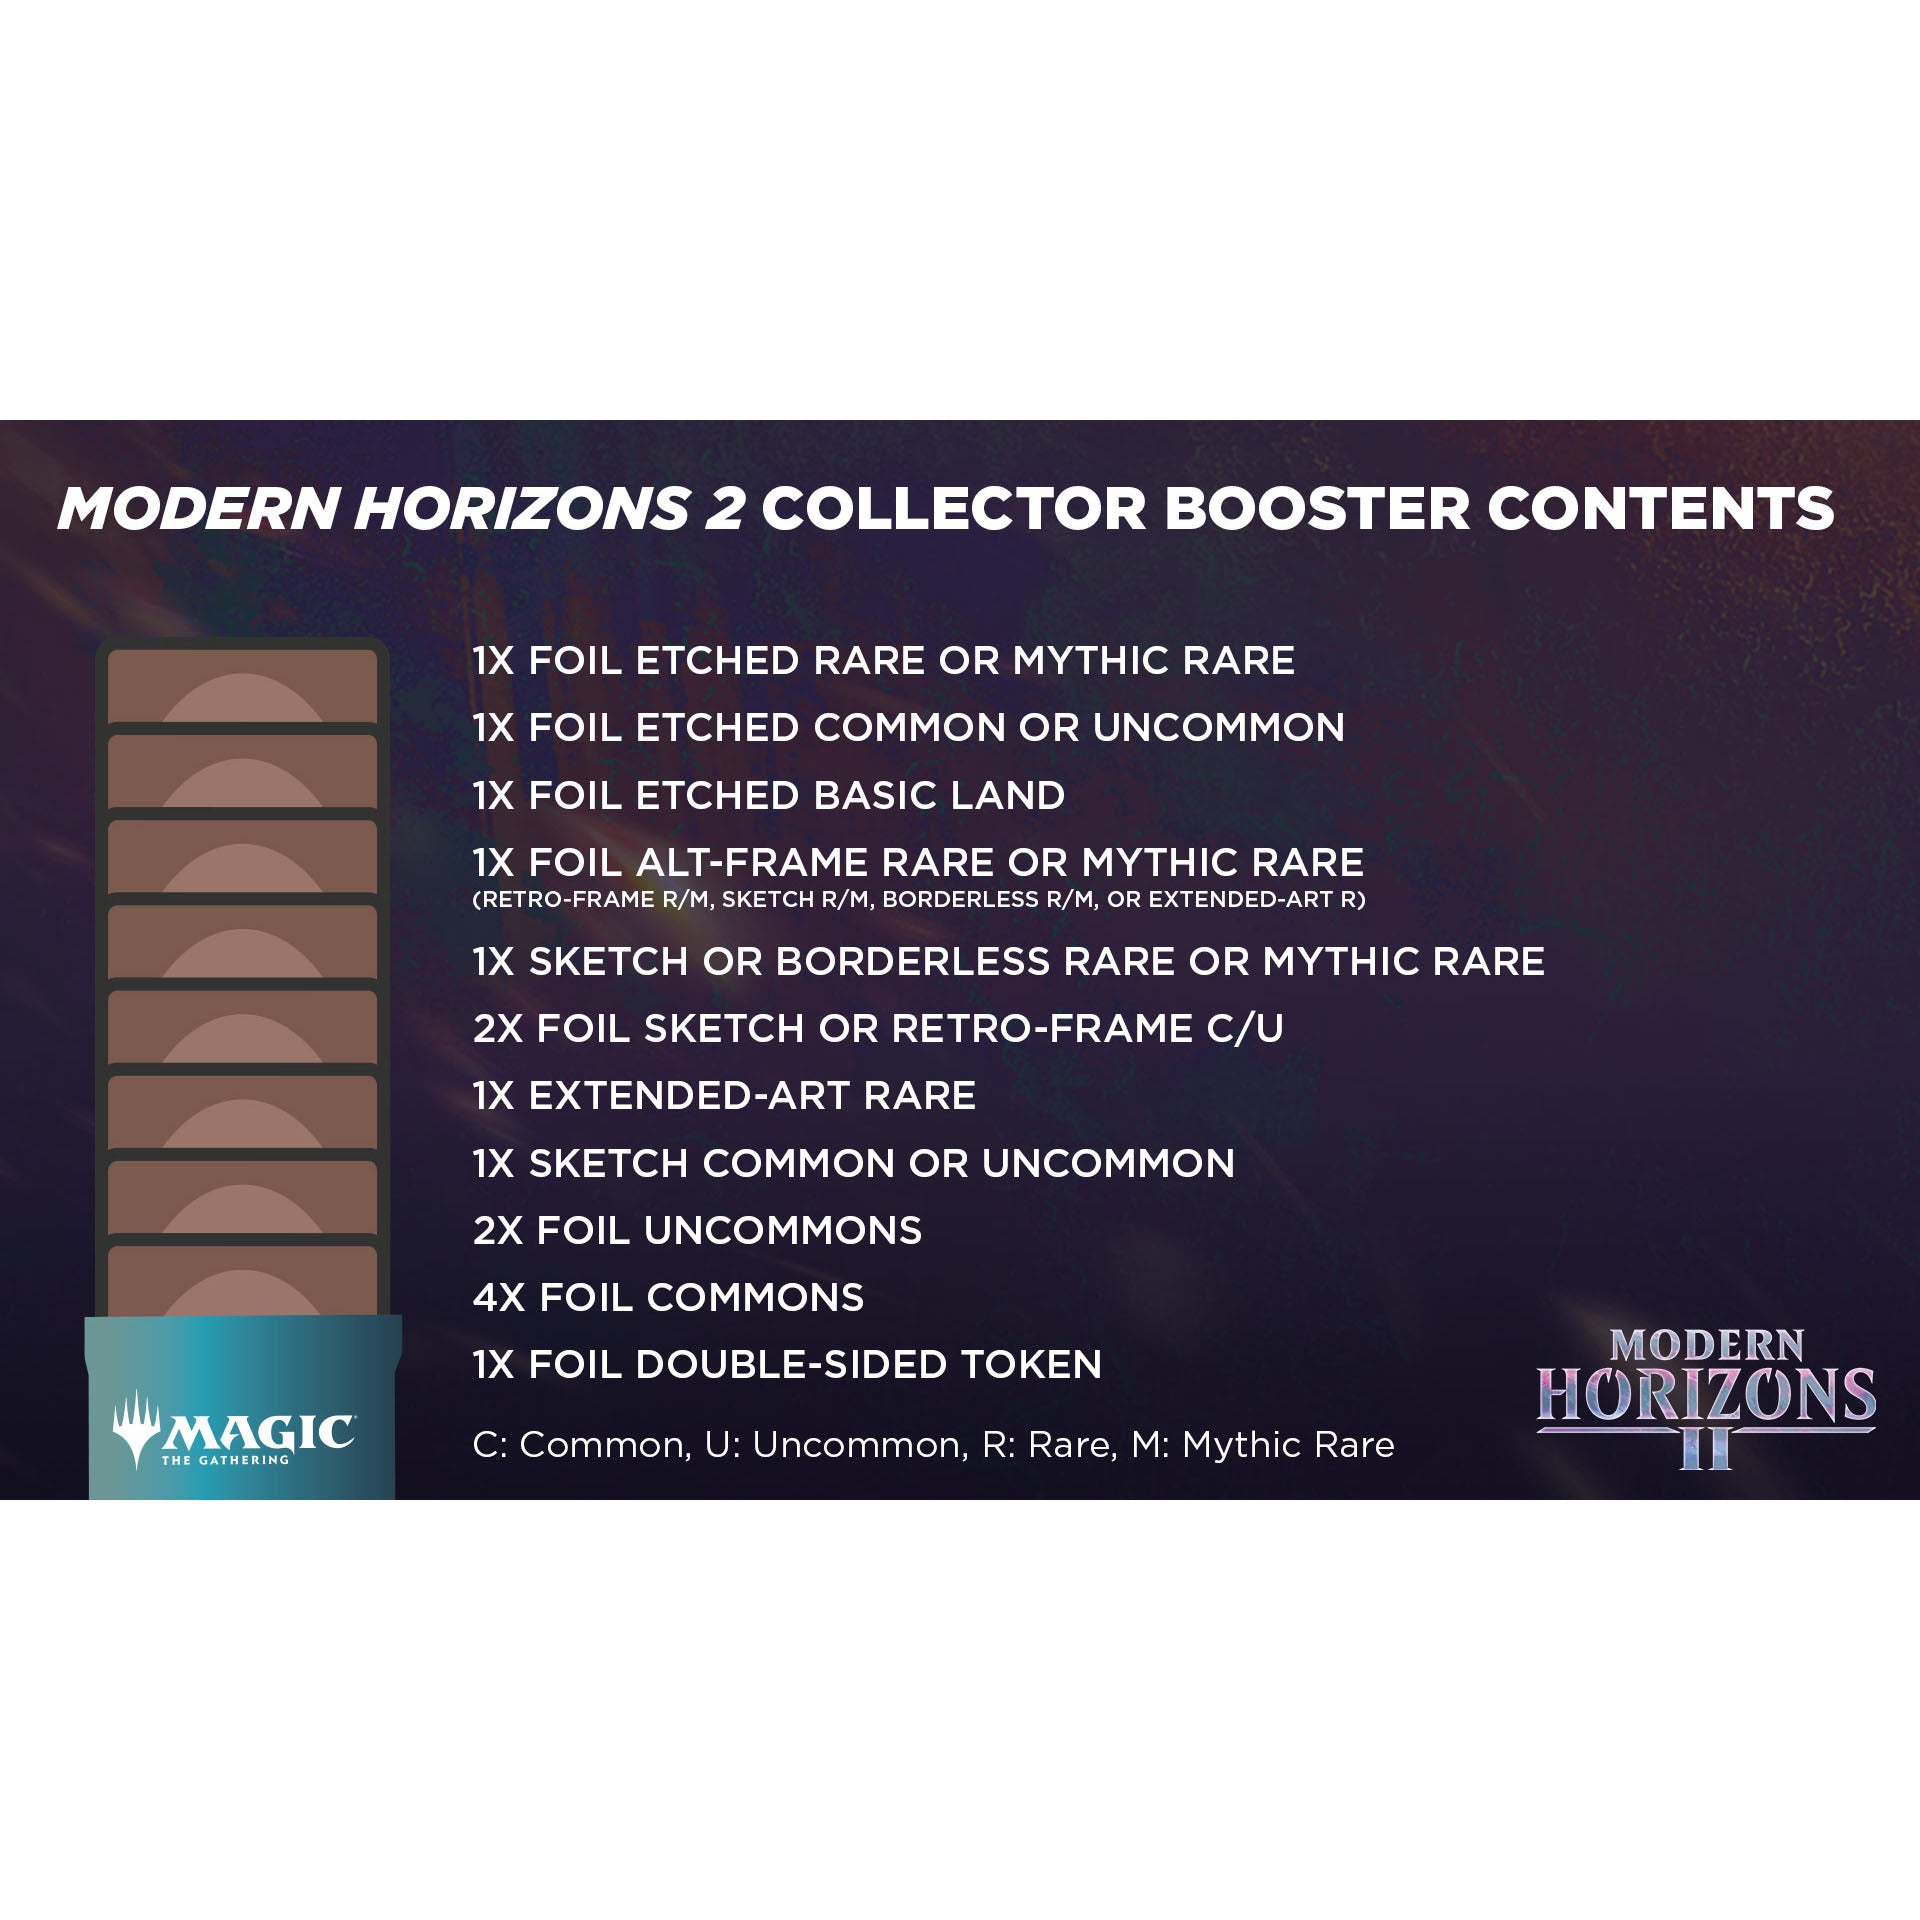 MTG Modern Horizons 2 Collector Booster Pack Contents